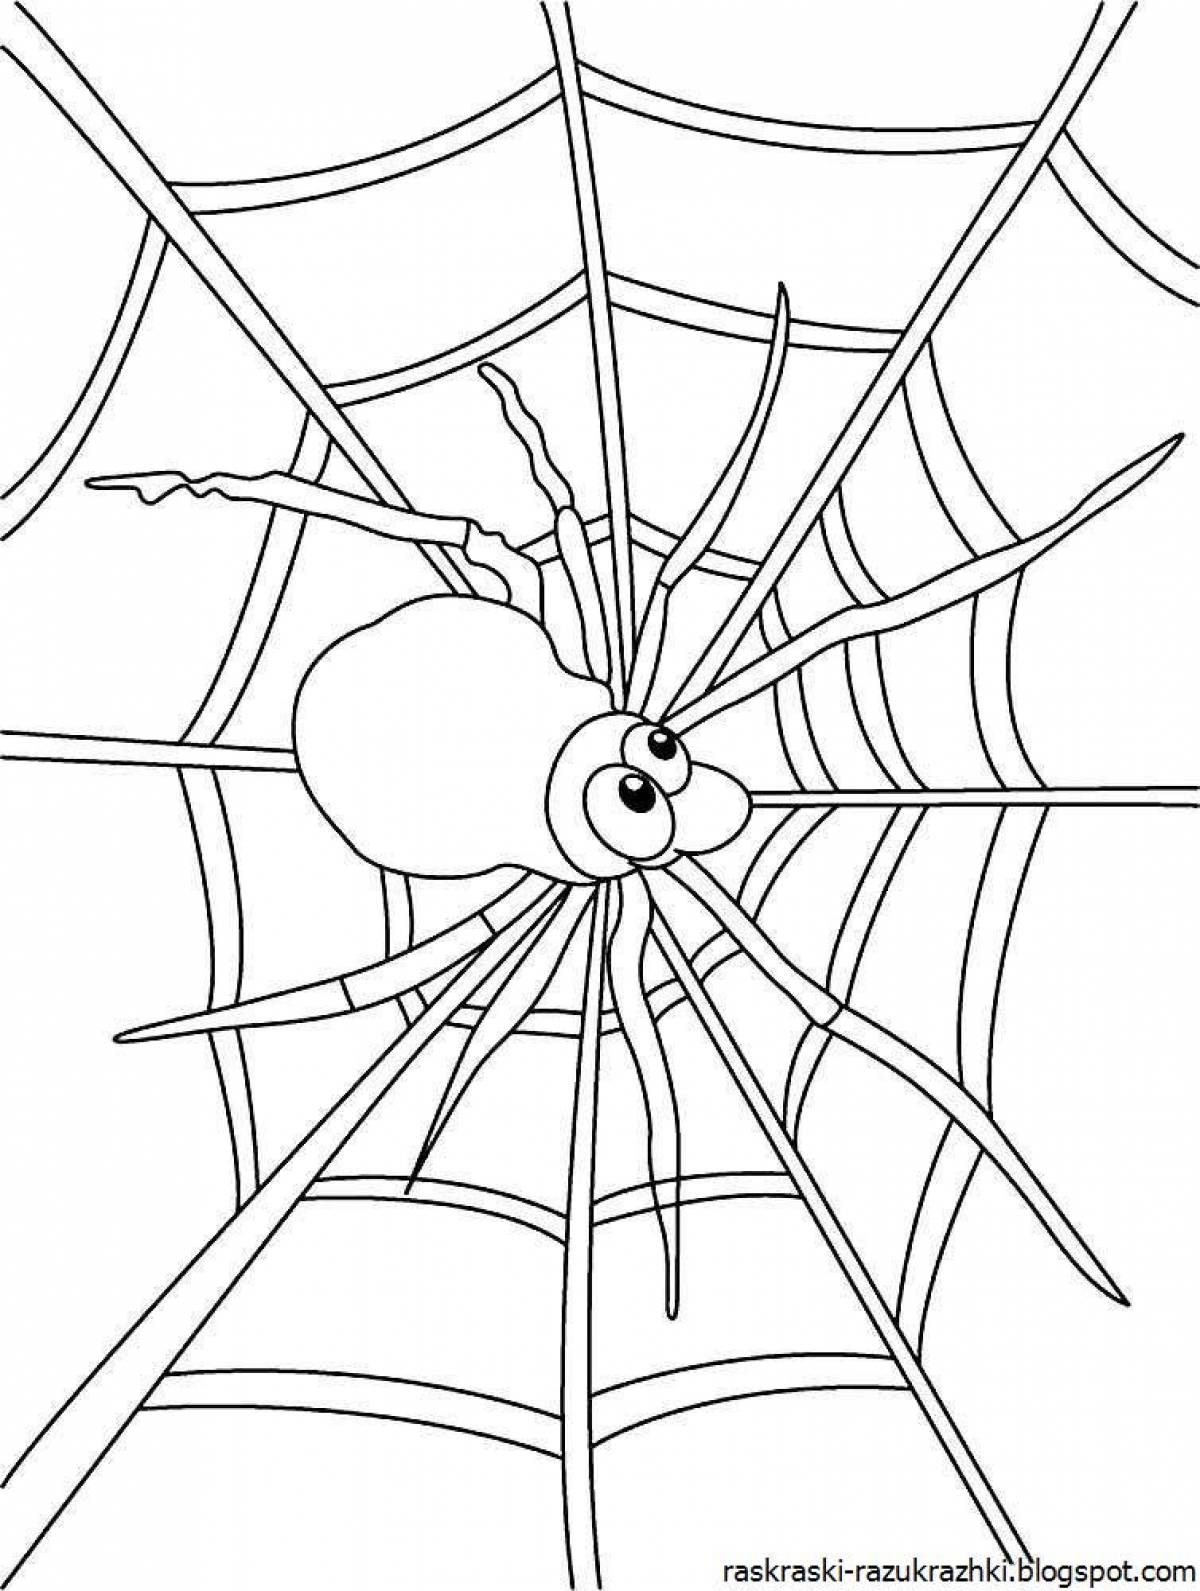 Fancy spider coloring page